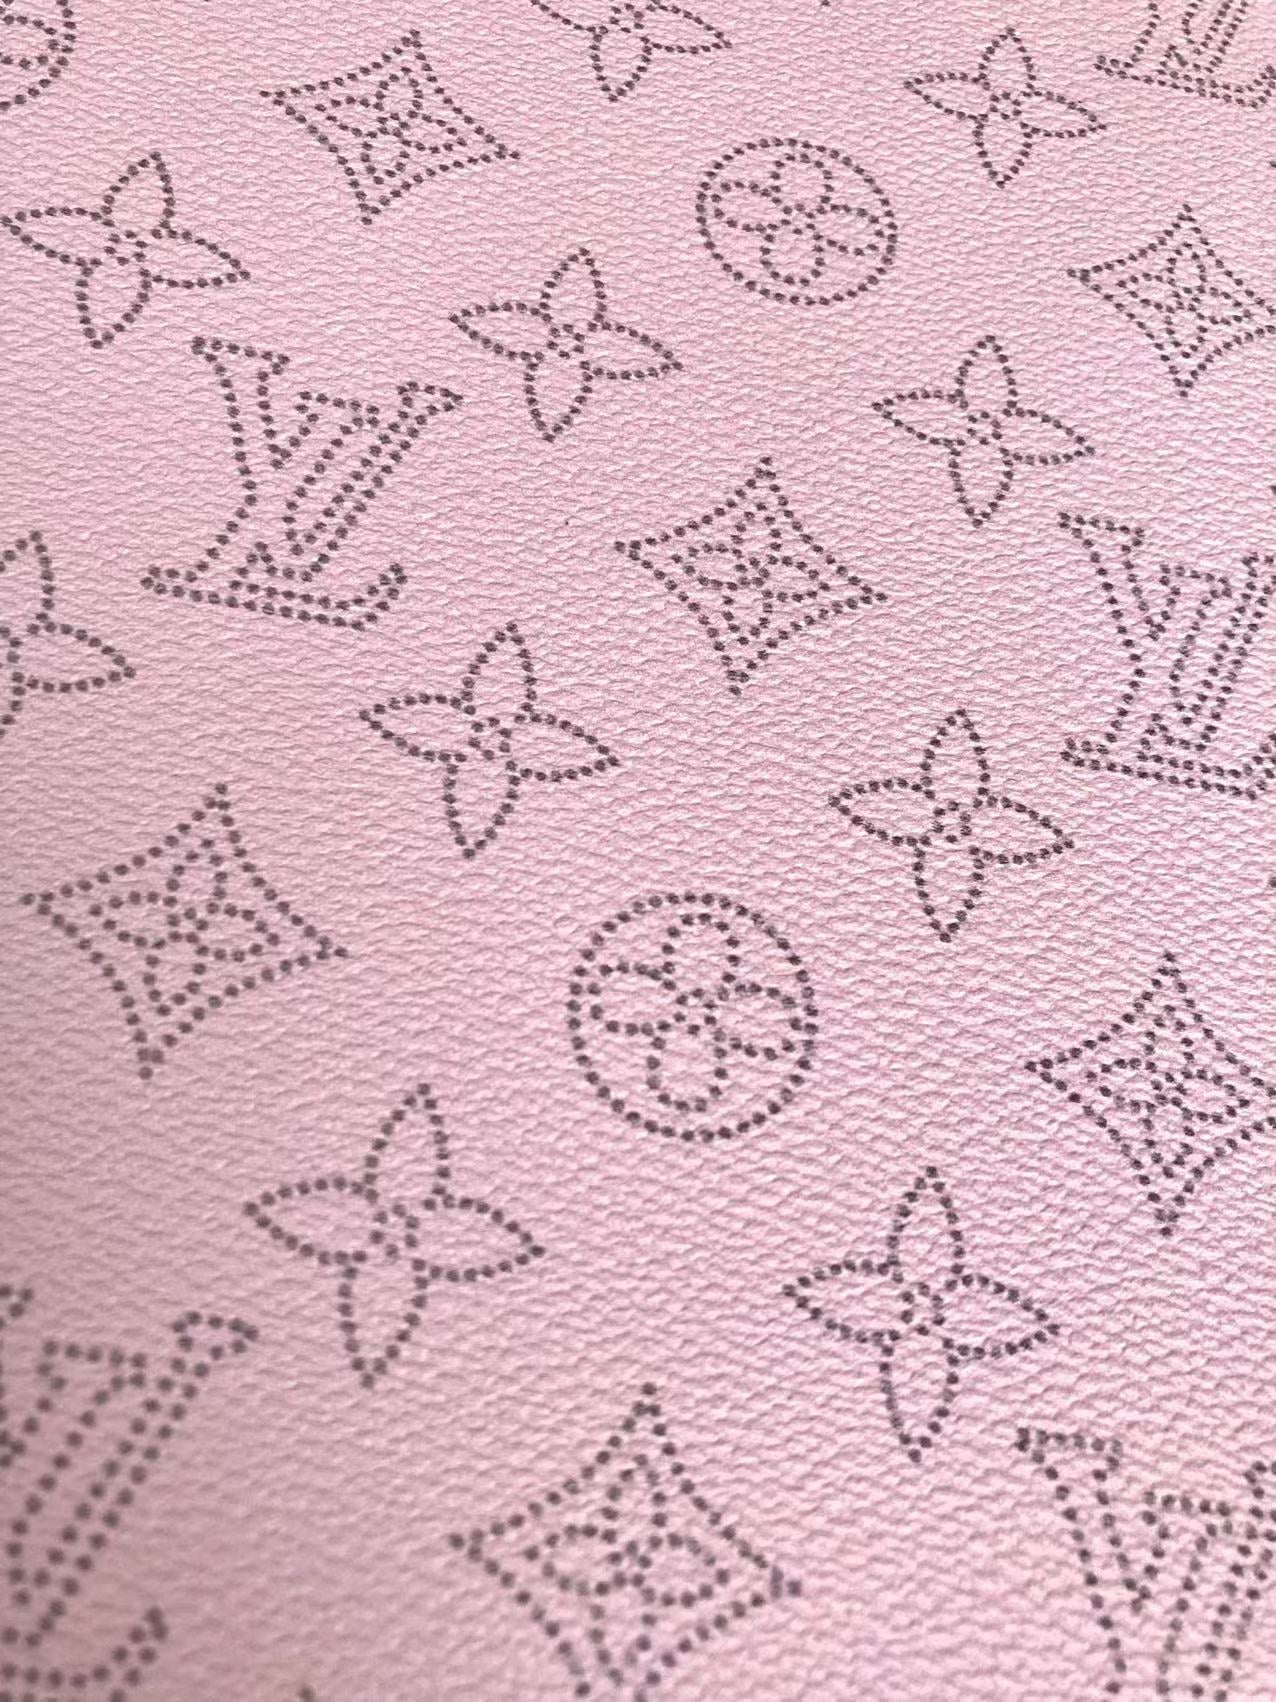 Pink Dot LV Leather for Custom Sneakers Bag Handcrafted